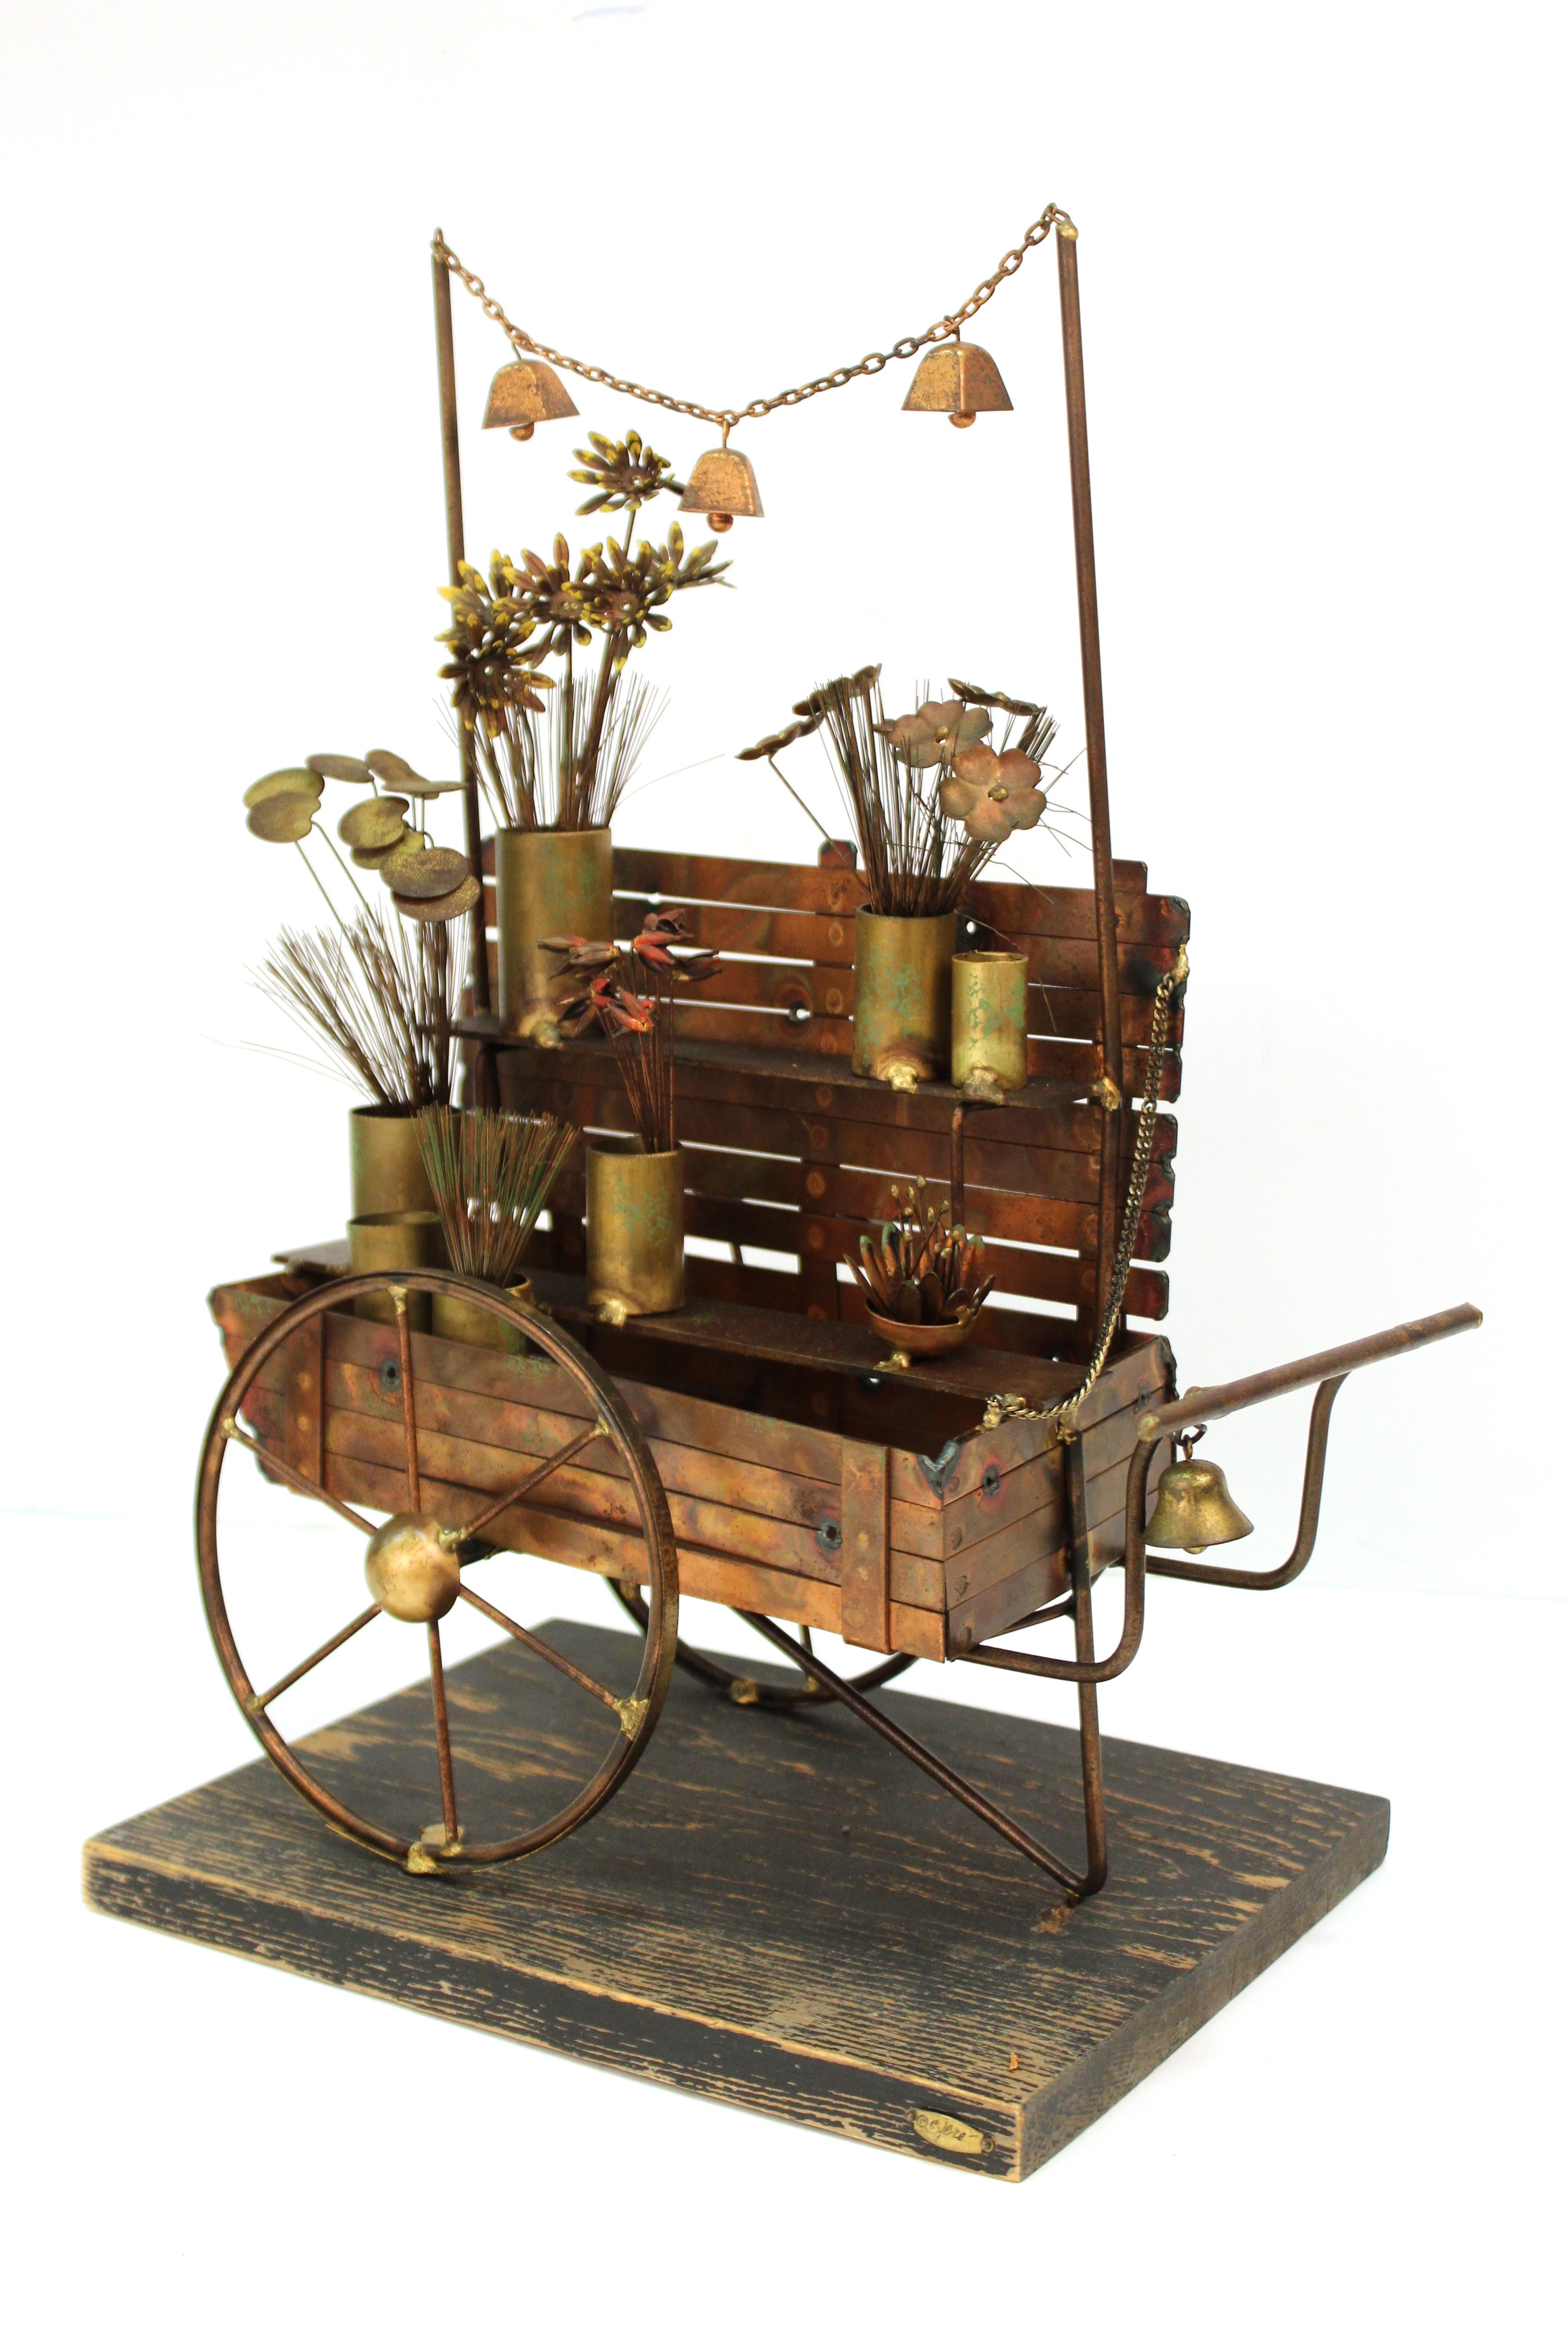 A Mid-Century Modern flower cart sculpture made by Curtis Jere in copper and brass on a wooden platform during the 1960s-1970s. Intricate detailing with flowers and baskets, with a little functioning bell hanging on the cart. Wear to metal but